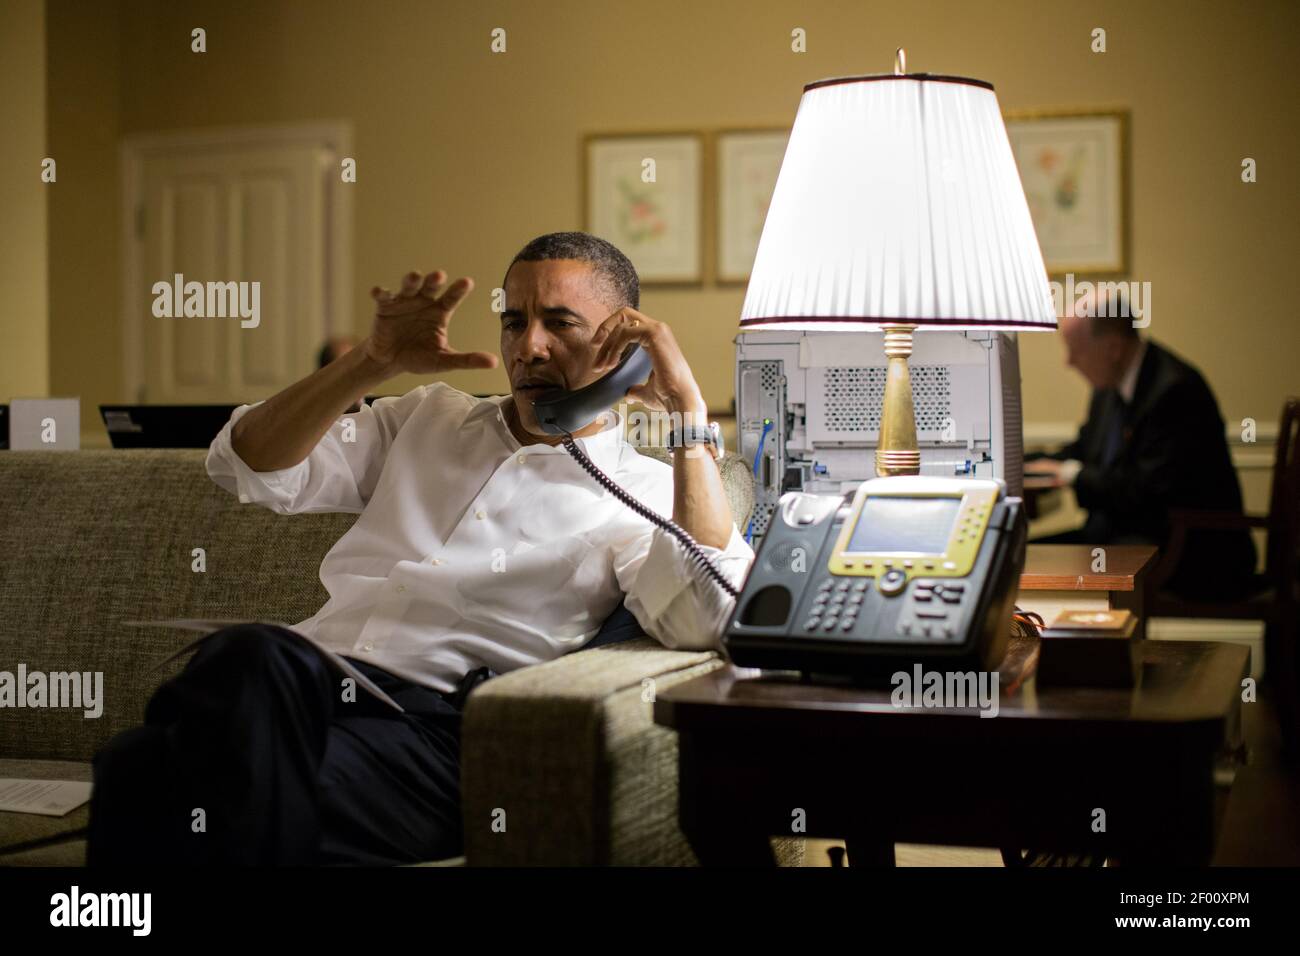 https://c8.alamy.com/comp/2F00XPM/19-november-2012-phnom-penh-cambodia-president-barack-obama-seen-here-in-an-image-released-by-the-white-house-talks-with-prime-minister-benjamin-netanyahu-of-israel-during-a-phone-call-from-his-hotel-suite-in-phnom-penh-cambodia-nov-19-2012-photo-credit-pete-souzawhite-housesipa-usa-this-official-white-house-photograph-is-being-made-available-only-for-publication-by-news-organizations-andor-for-personal-use-printing-by-the-subjects-of-the-photograph-the-photograph-may-not-be-manipulated-in-any-way-and-may-not-be-used-in-commercial-or-political-materials-advertisements-emai-2F00XPM.jpg